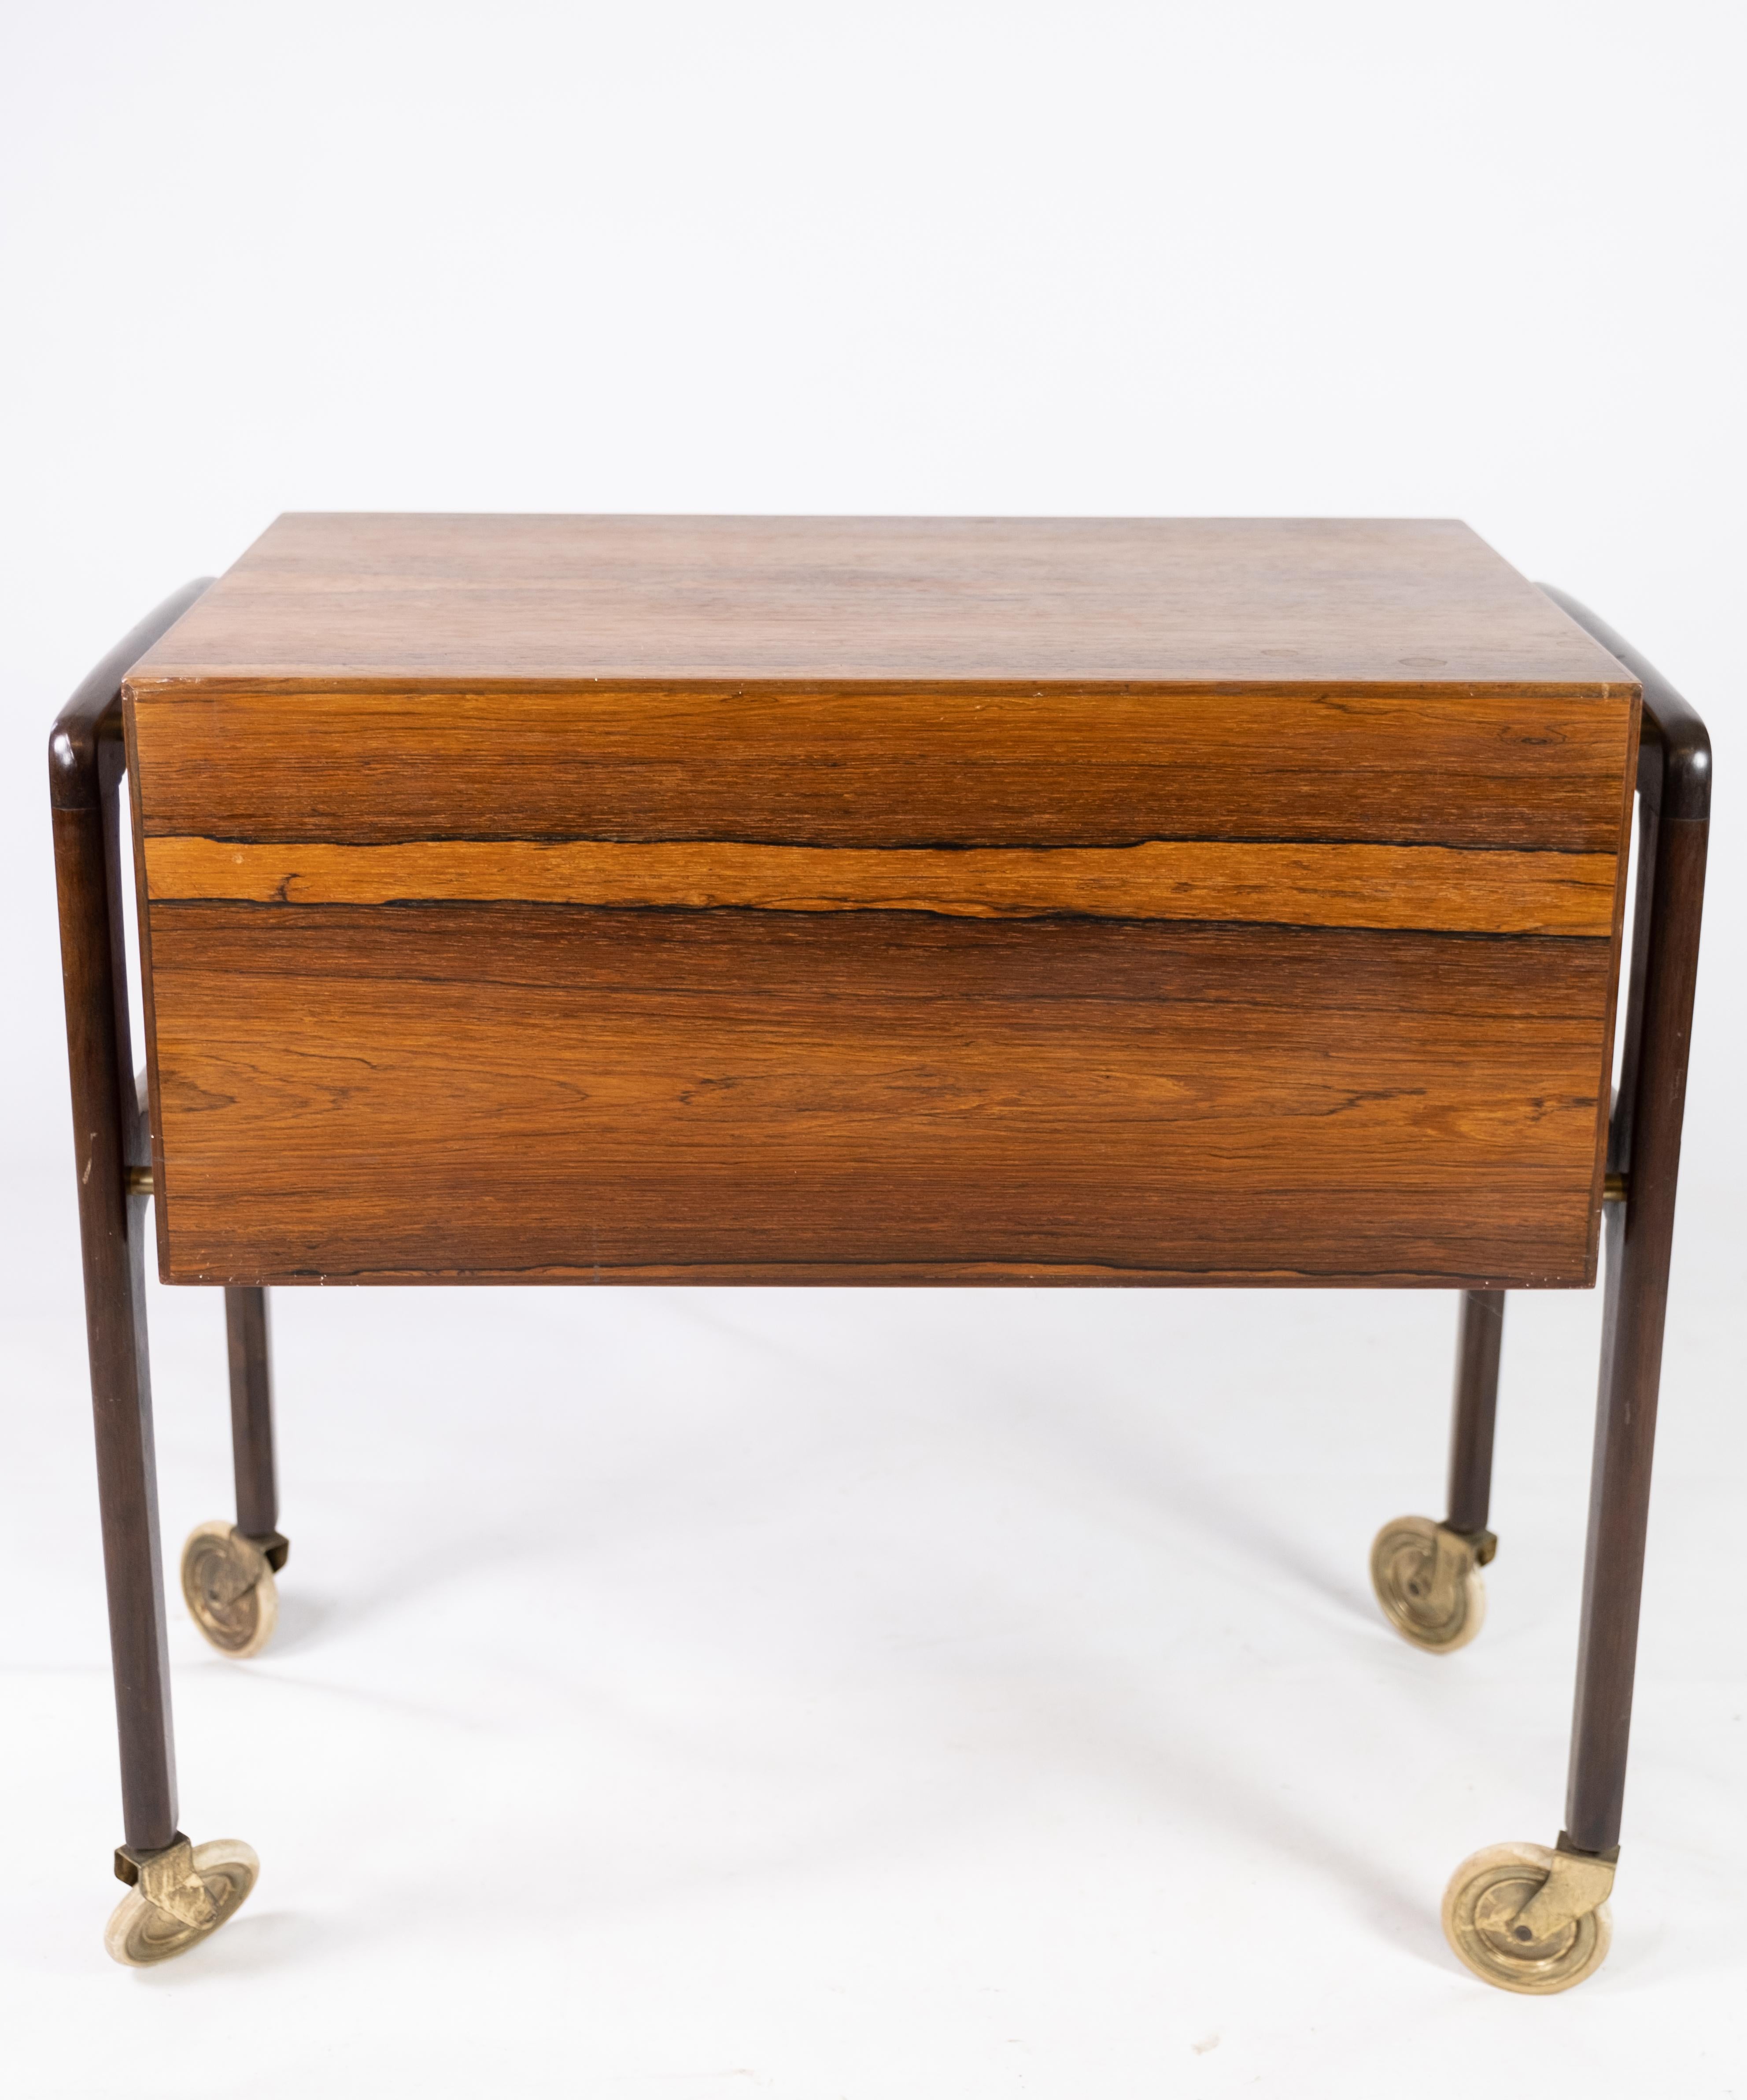 Small Chest of Drawers on Wheels in Rosewood of Danish Design from the 1960s For Sale 1